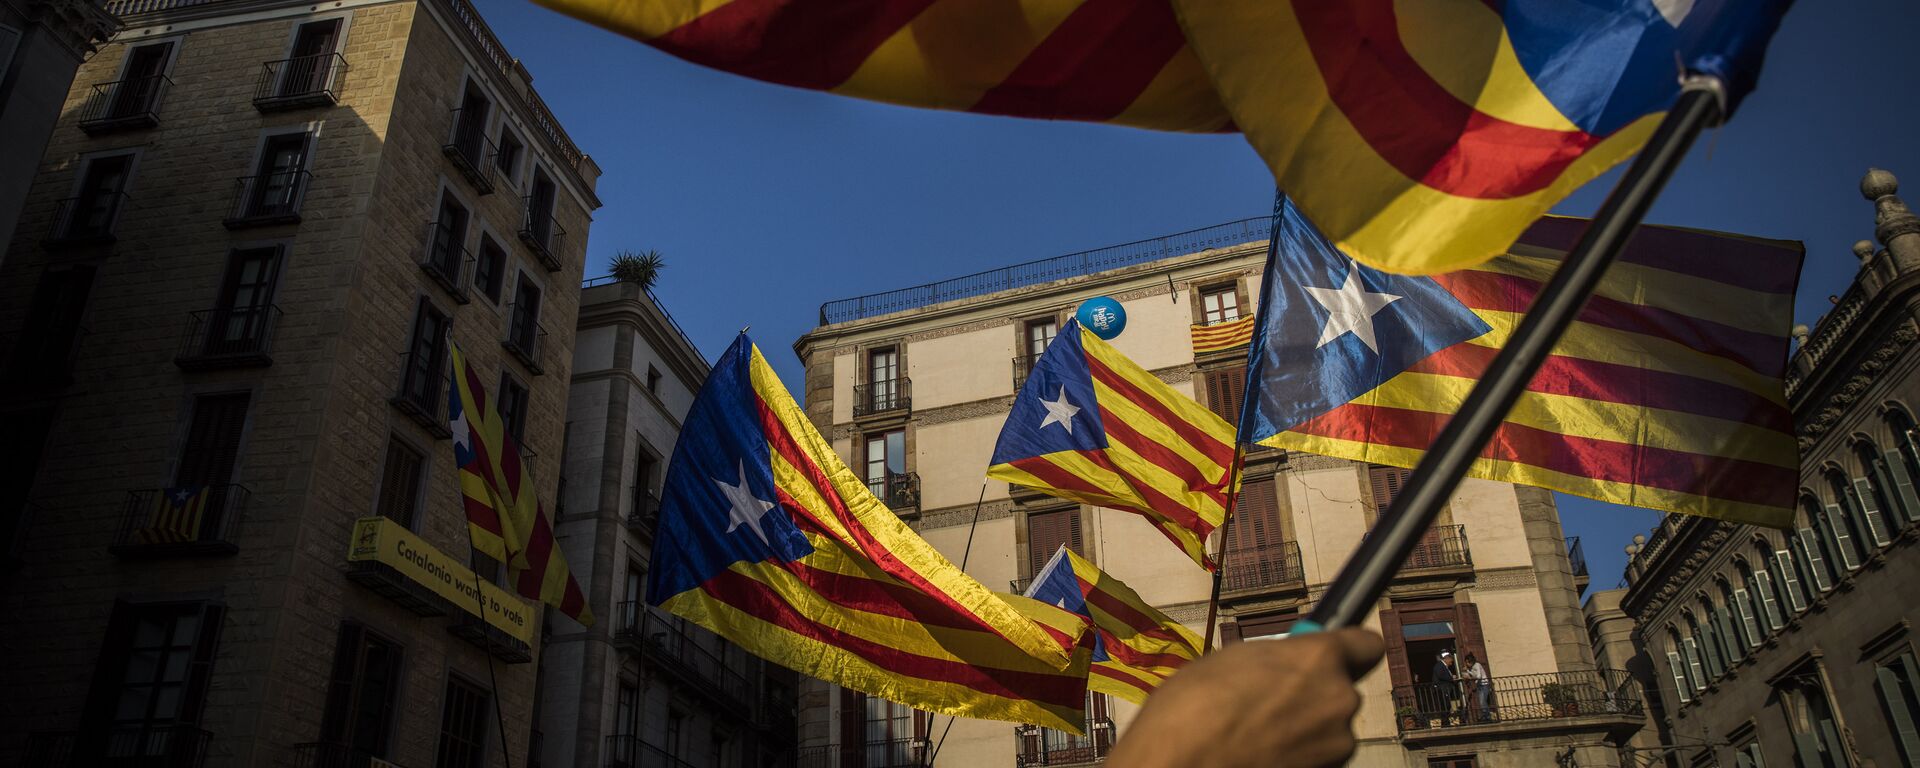 People wave independence flags just after the speech of Catalan regional president Carles Puigdemont in Barcelona, Spain, Thursday, Oct. 26, 2017.  - Sputnik International, 1920, 07.10.2022